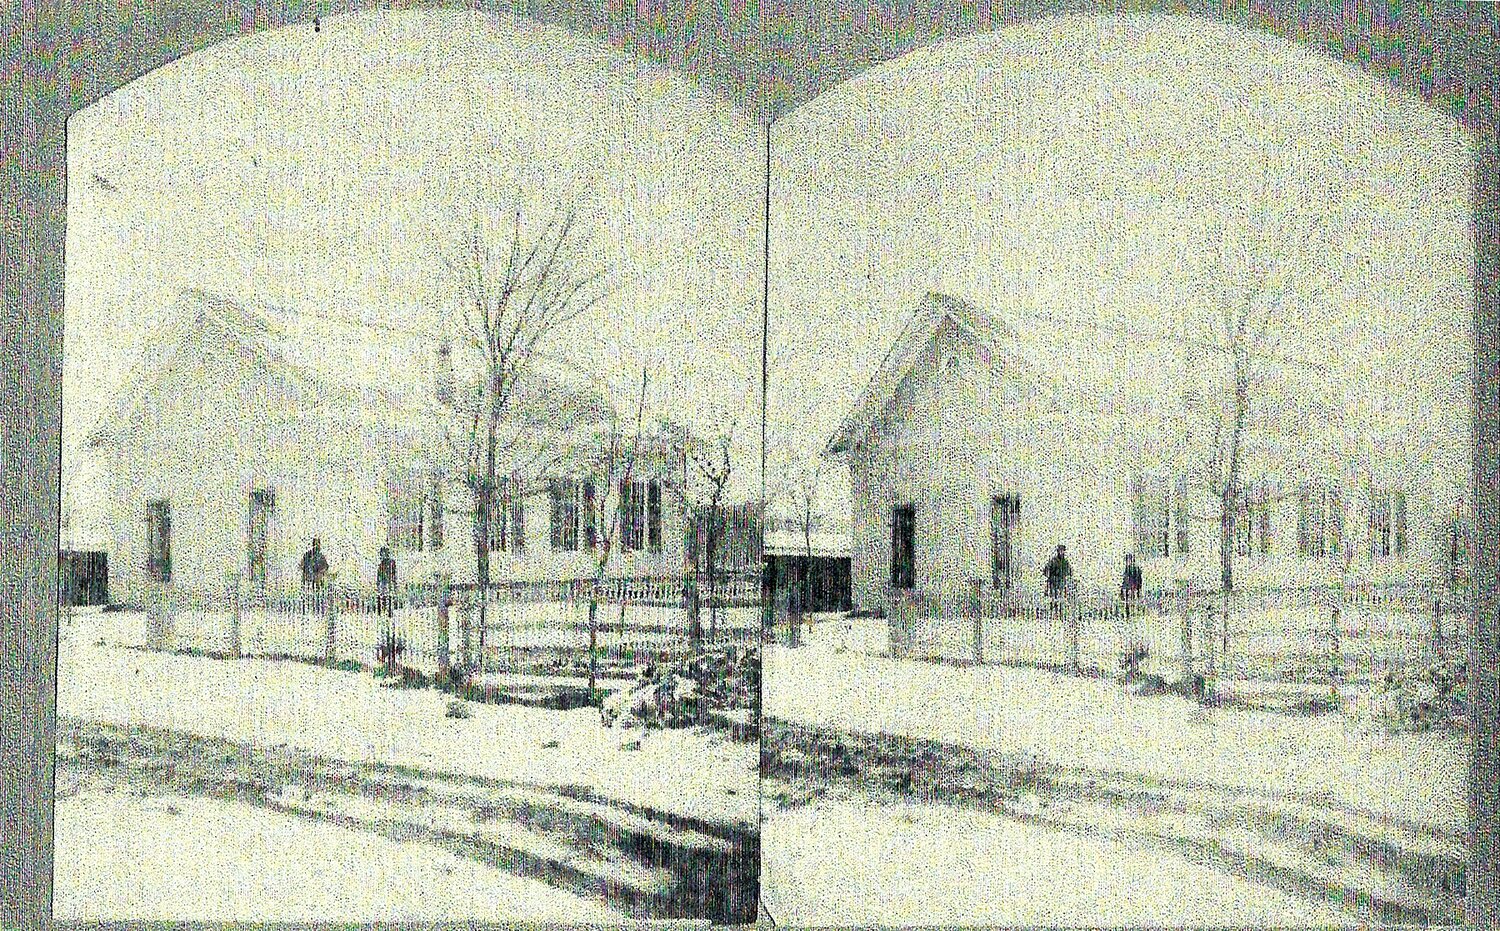 The first known photograph of the church in Lahaska.